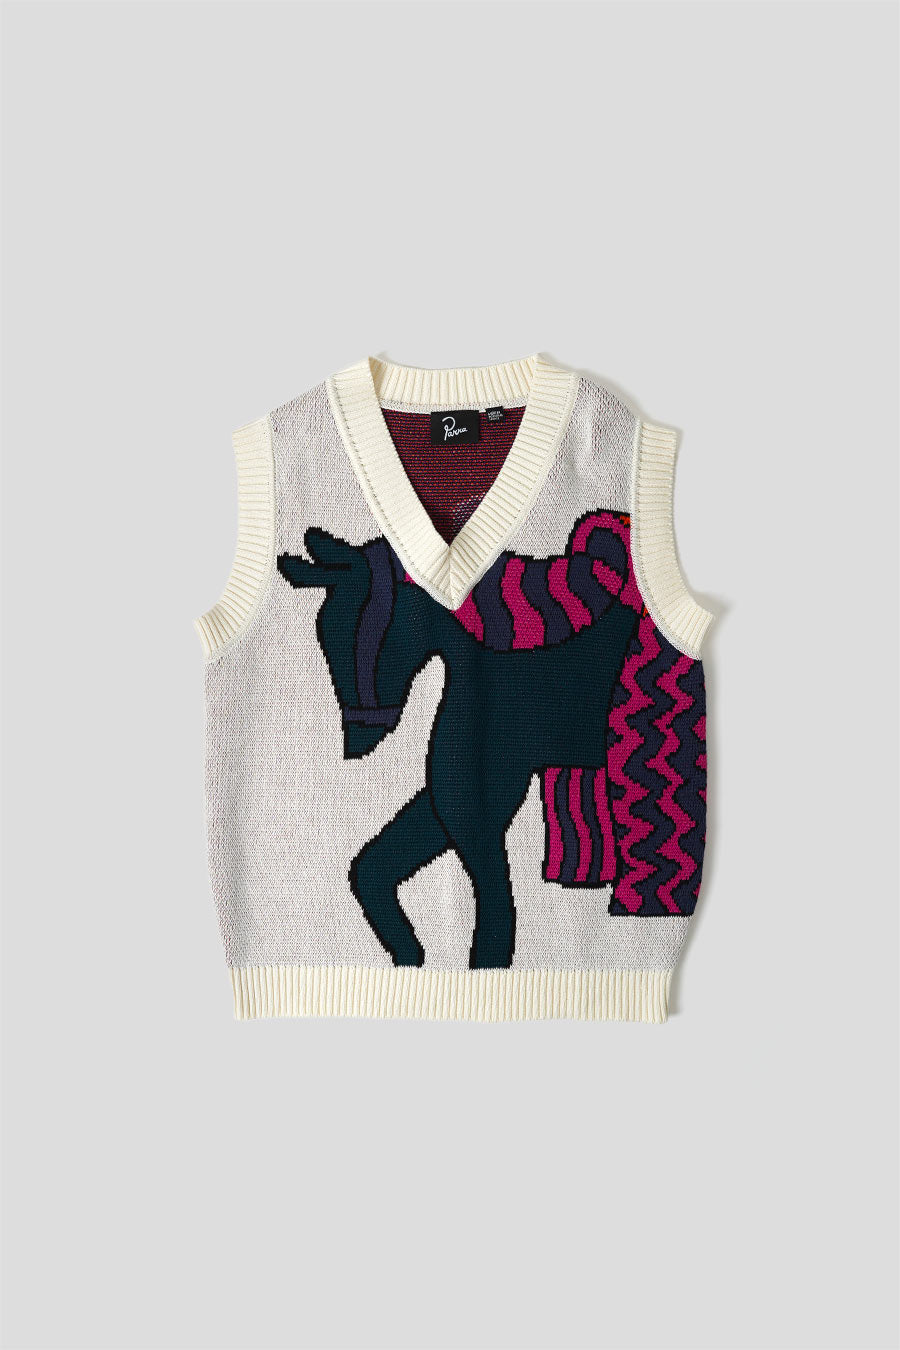 BY PARRA - OFF WHITE HORSE SPENCER KNITTED - LE LABO STORE